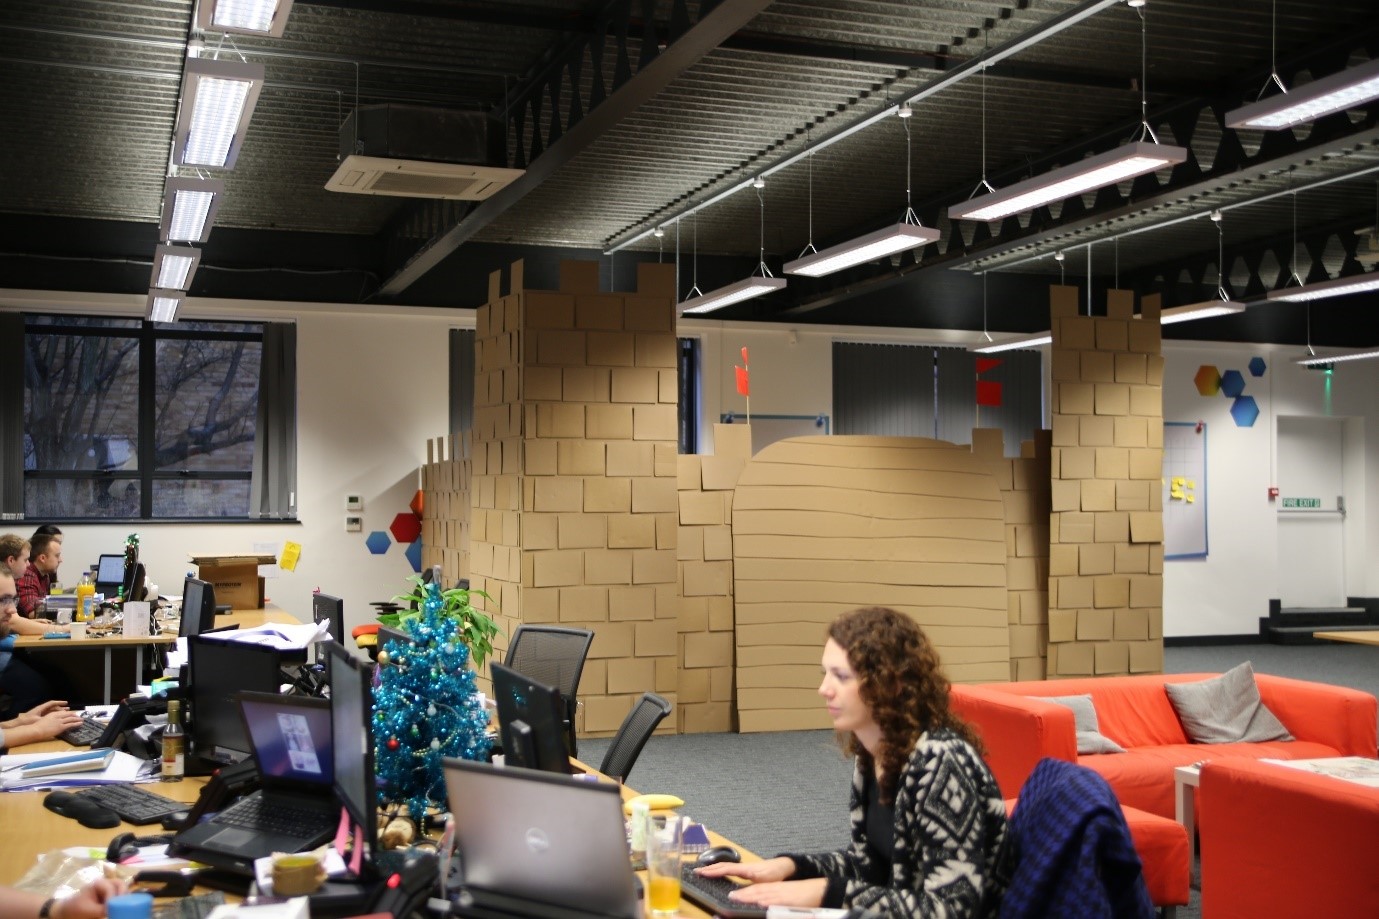 PHOTO: Coworkers Built a 10-Foot-Tall Cardboard Castle in Office